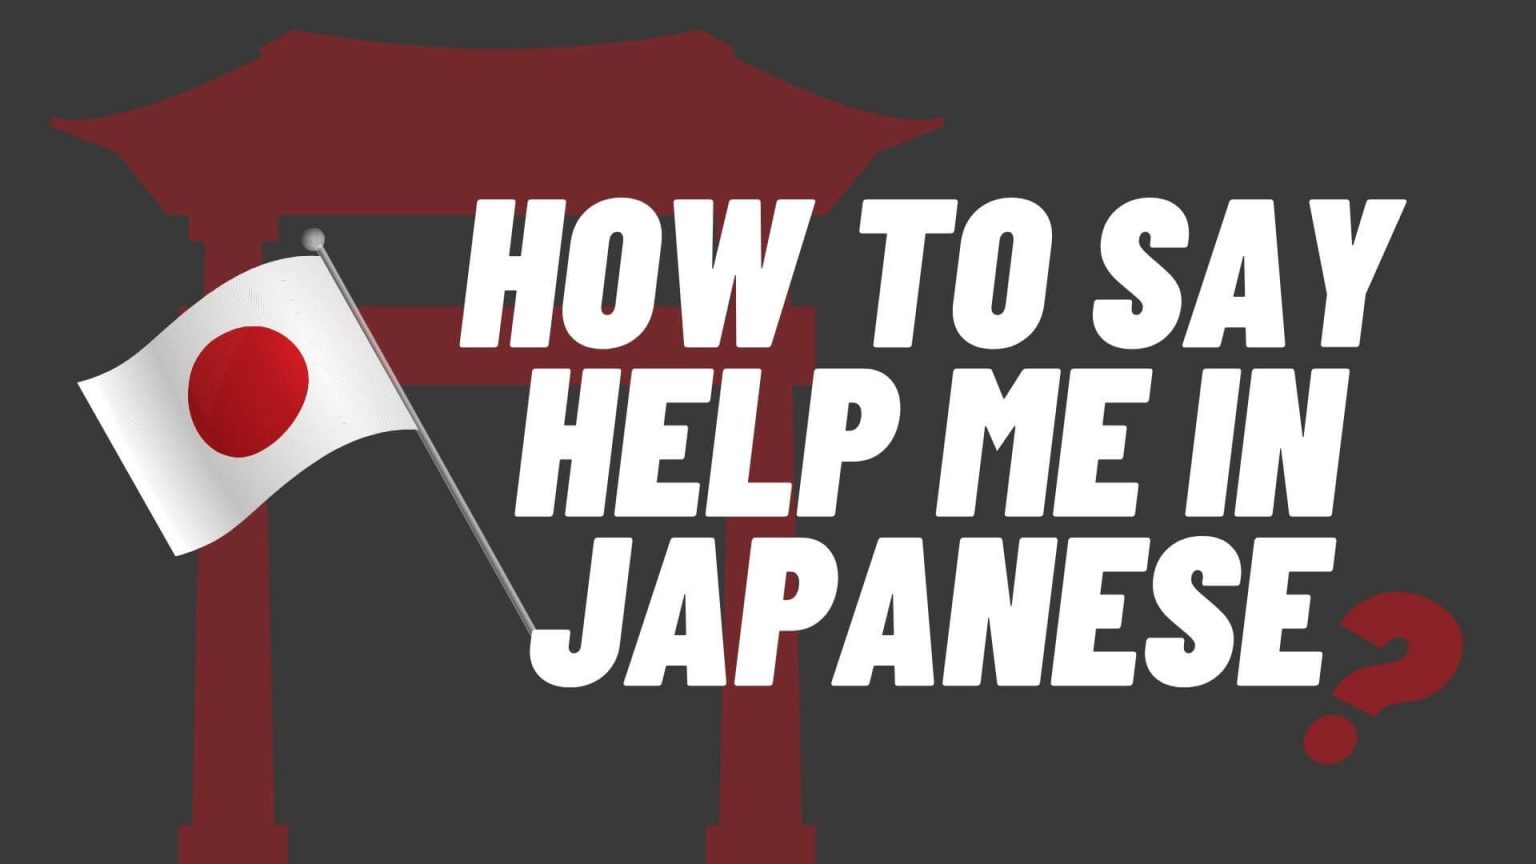 How To Say Help Me In Japanese?